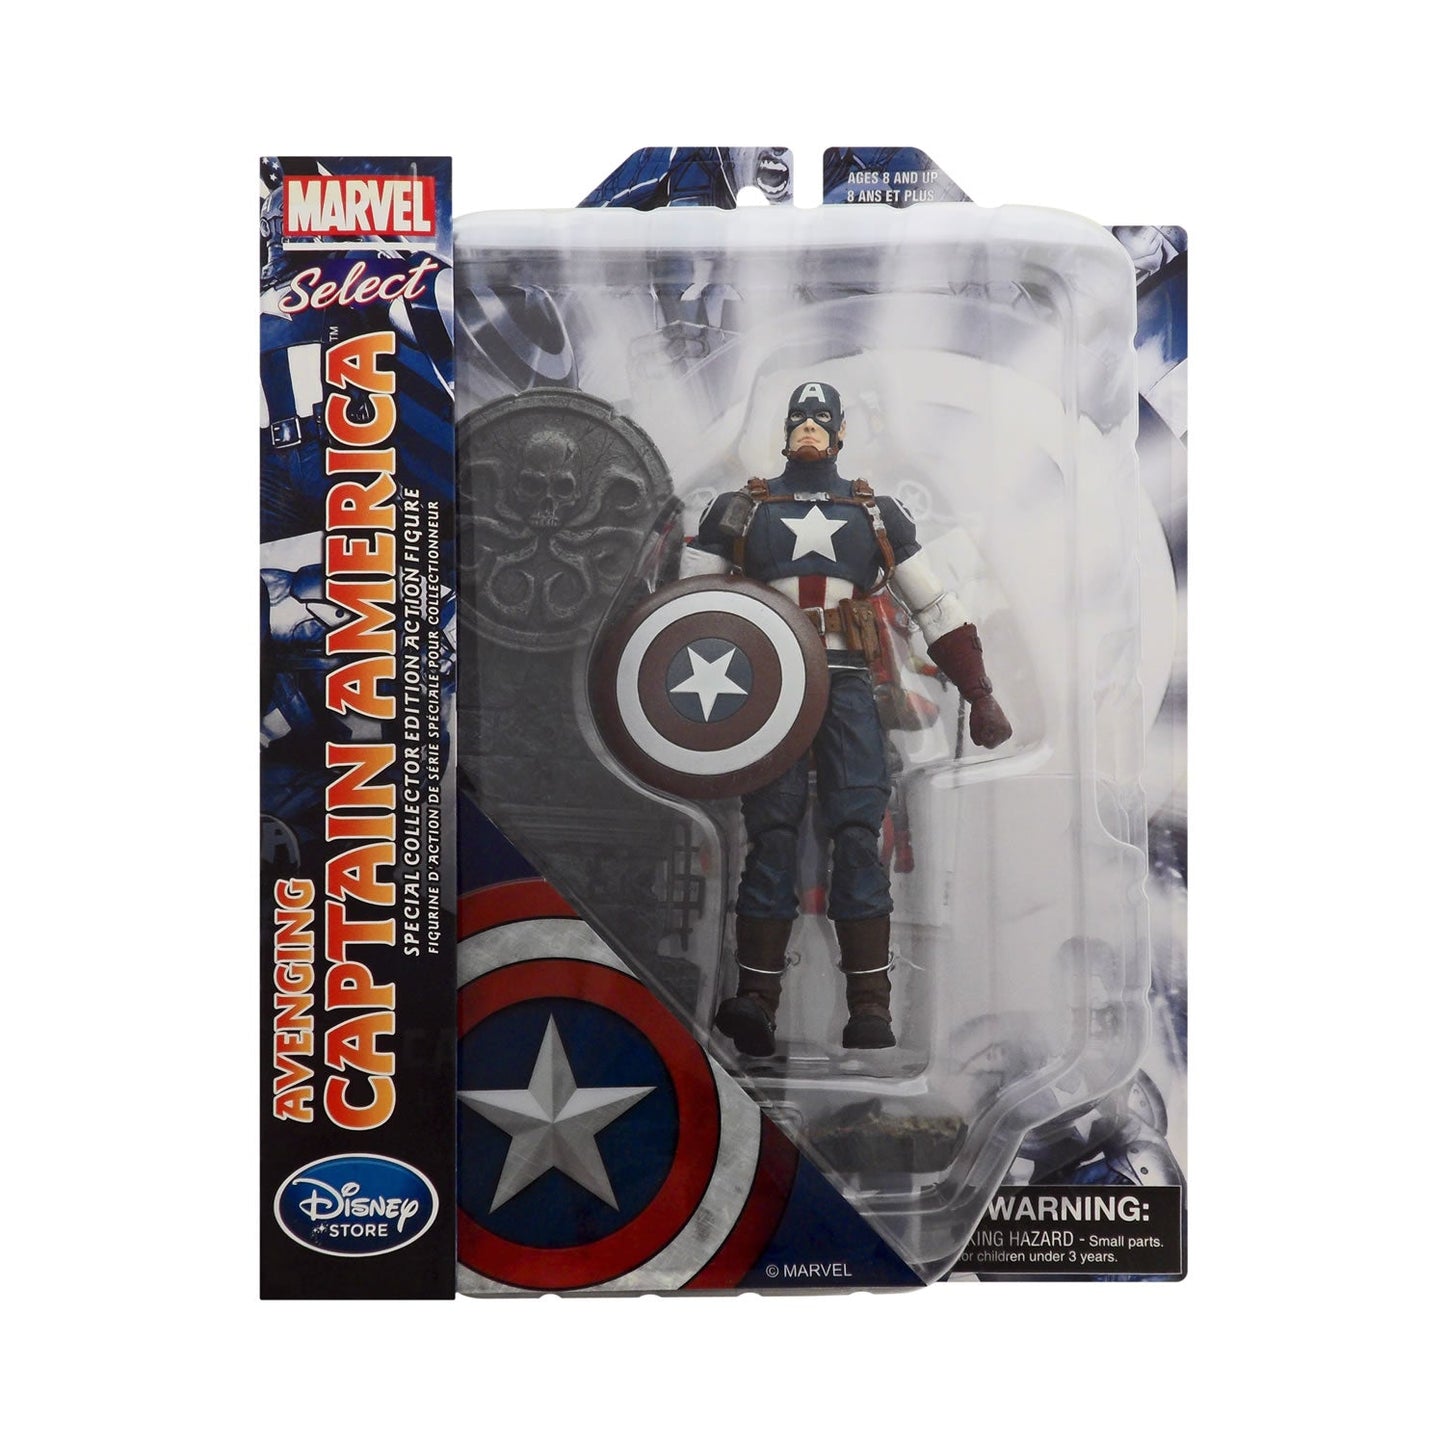 Marvel Select Exclusive Avenging Captain America Action Figure